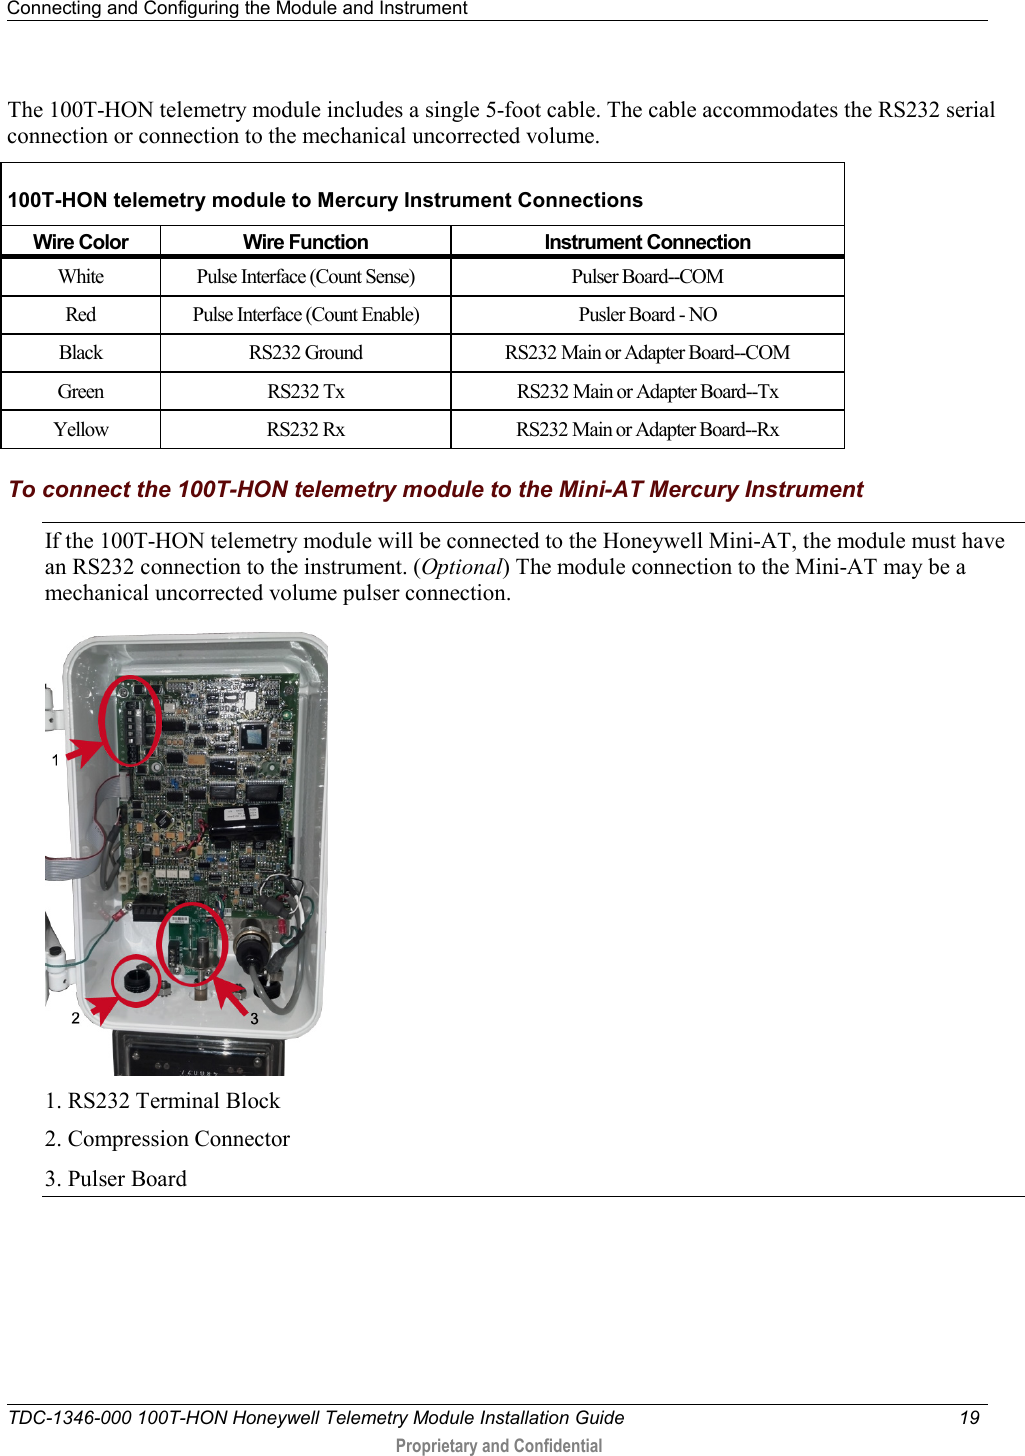 Connecting and Configuring the Module and Instrument   TDC-1346-000 100T-HON Honeywell Telemetry Module Installation Guide 19   Proprietary and Confidential     The 100T-HON telemetry module includes a single 5-foot cable. The cable accommodates the RS232 serial connection or connection to the mechanical uncorrected volume.  100T-HON telemetry module to Mercury Instrument Connections Wire Color  Wire Function Instrument Connection White Pulse Interface (Count Sense) Pulser Board--COM  Red Pulse Interface (Count Enable) Pusler Board - NO Black RS232 Ground RS232 Main or Adapter Board--COM Green  RS232 Tx RS232 Main or Adapter Board--Tx Yellow RS232 Rx RS232 Main or Adapter Board--Rx  To connect the 100T-HON telemetry module to the Mini-AT Mercury Instrument If the 100T-HON telemetry module will be connected to the Honeywell Mini-AT, the module must have an RS232 connection to the instrument. (Optional) The module connection to the Mini-AT may be a mechanical uncorrected volume pulser connection.  1. RS232 Terminal Block 2. Compression Connector 3. Pulser Board 